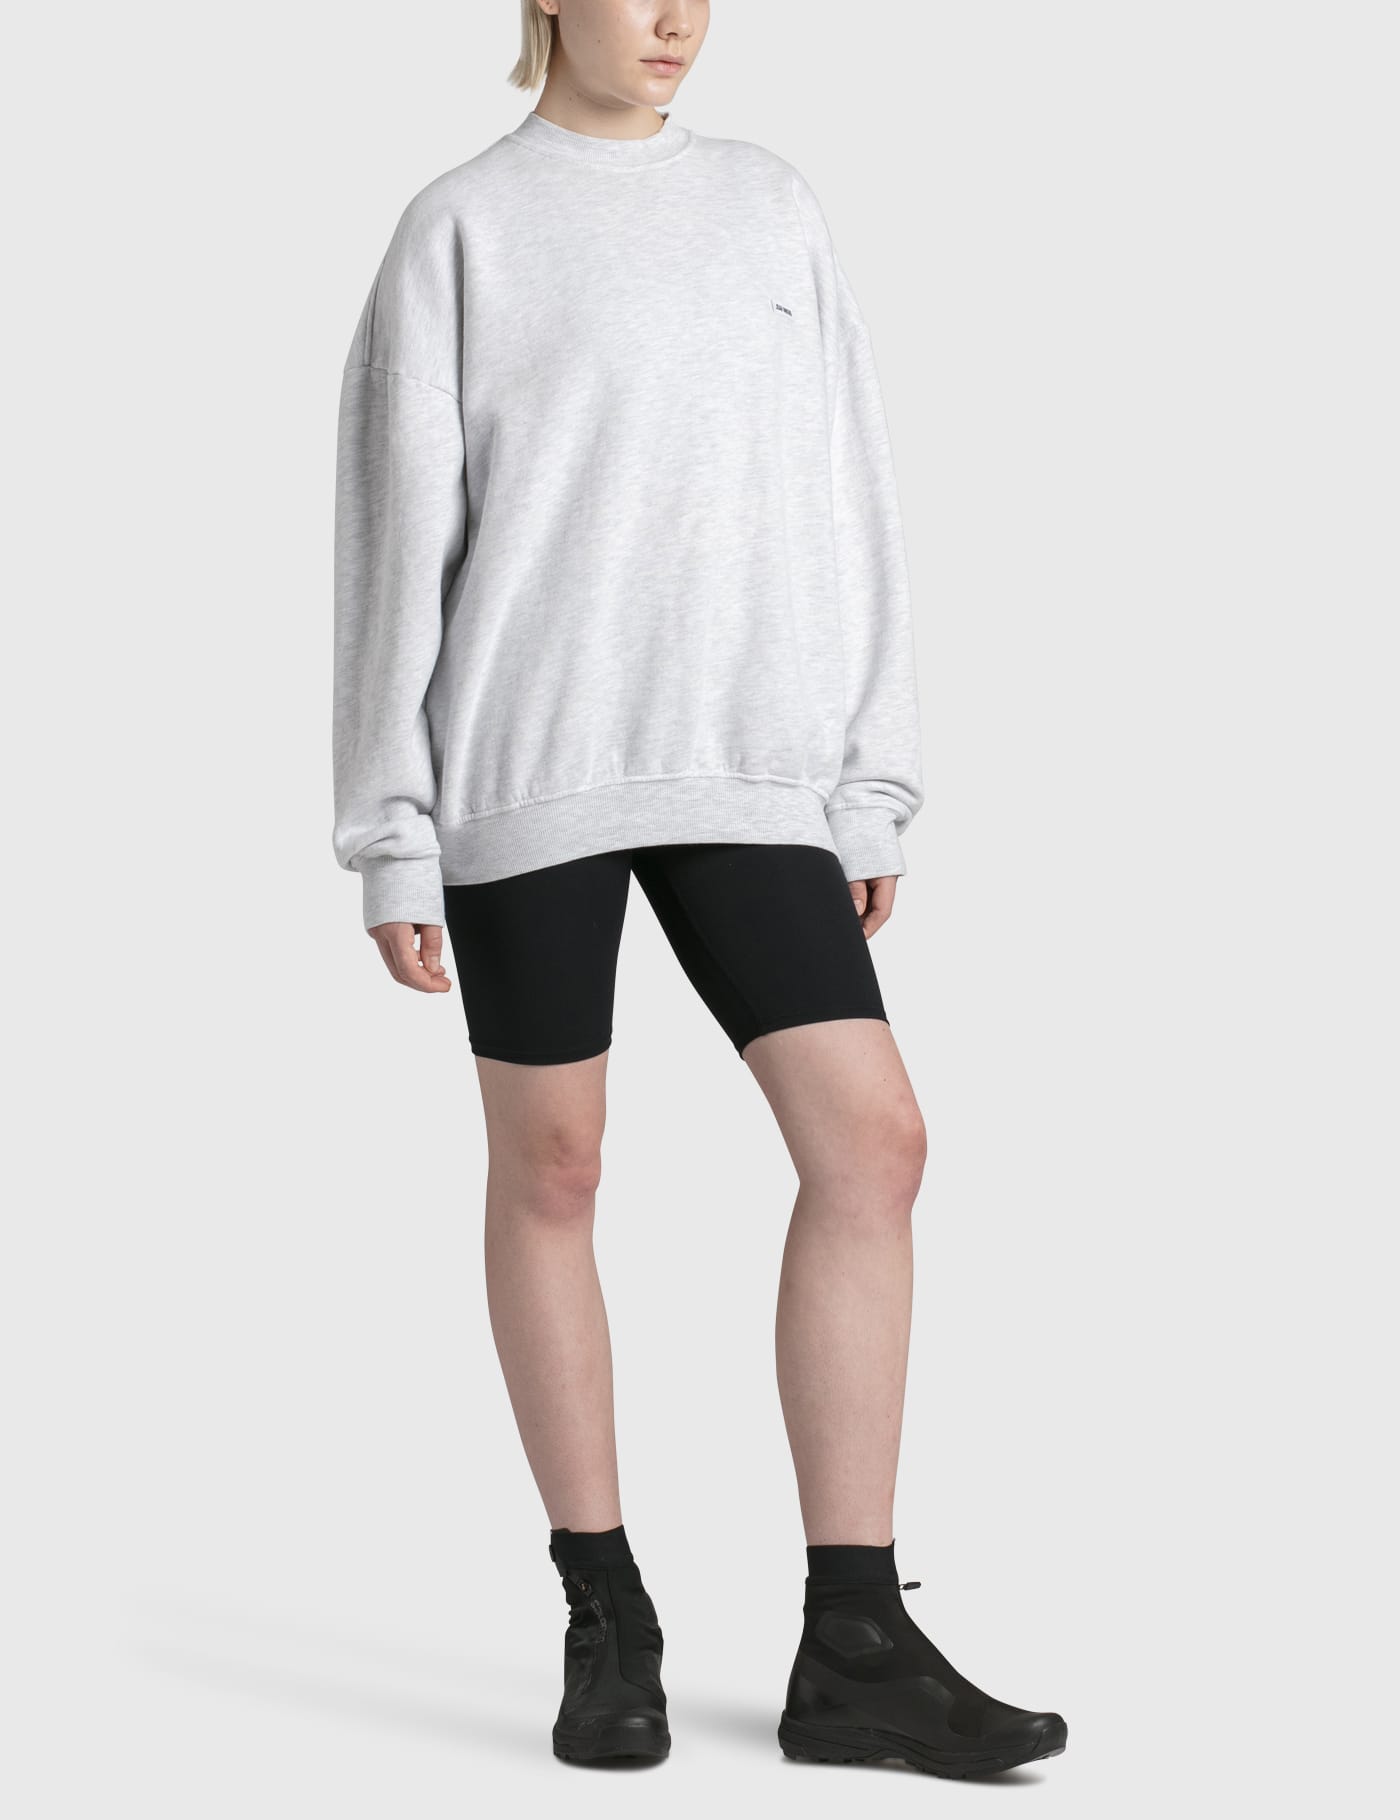 Joah Brown - Classic Crew Pullover | HBX - Globally Curated 